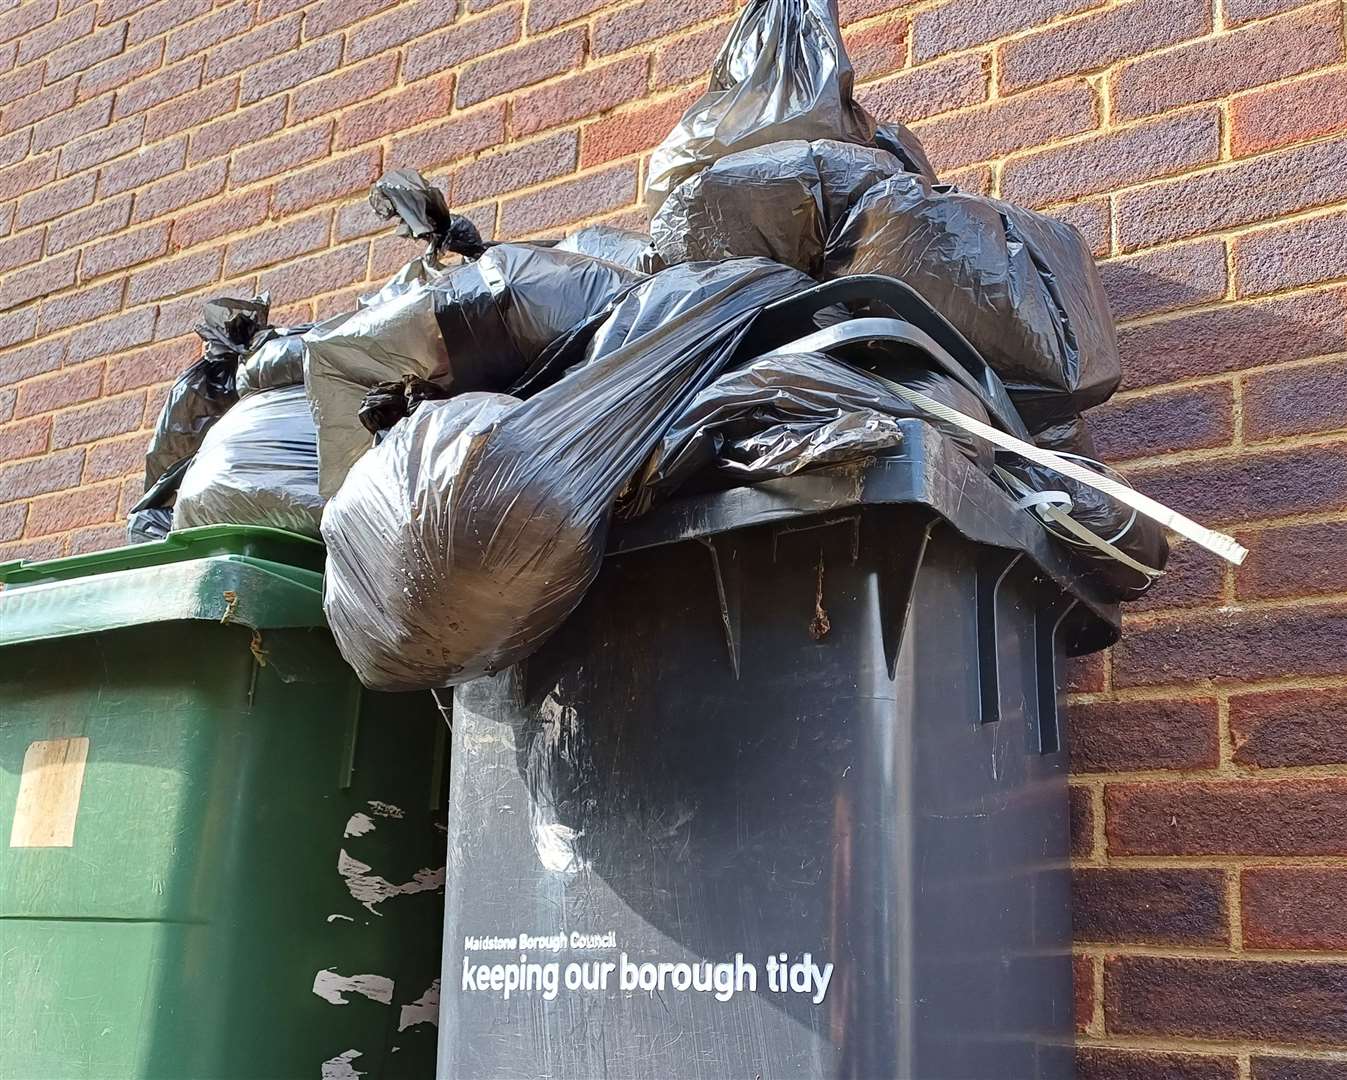 The changing of the bin contract has caused issues to collections in Maidstone